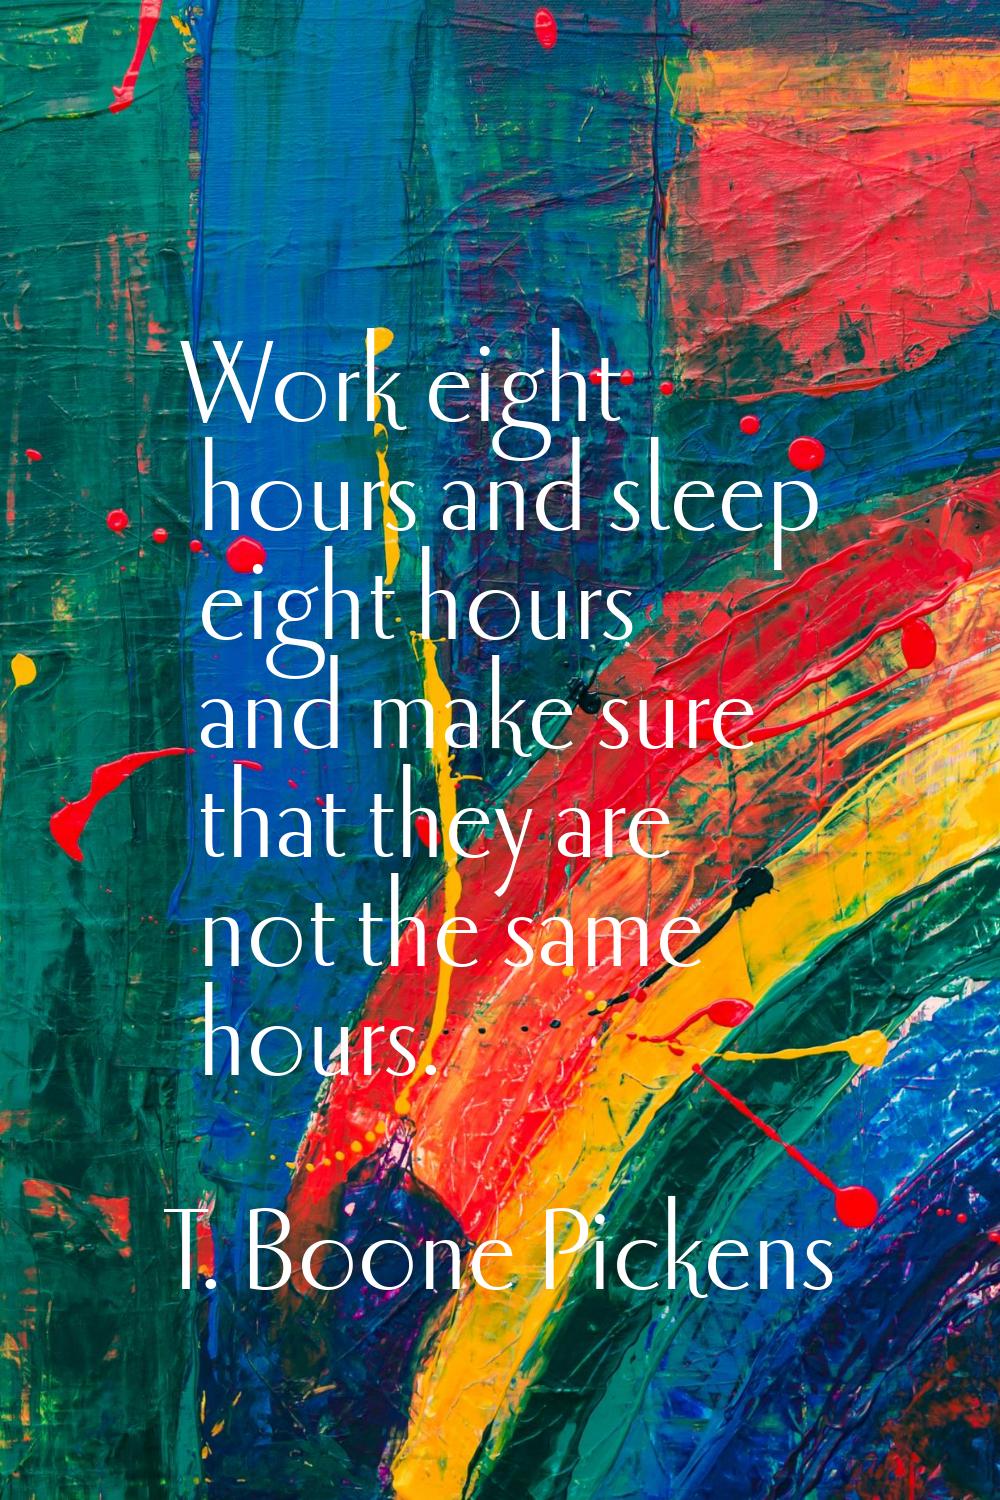 Work eight hours and sleep eight hours and make sure that they are not the same hours.